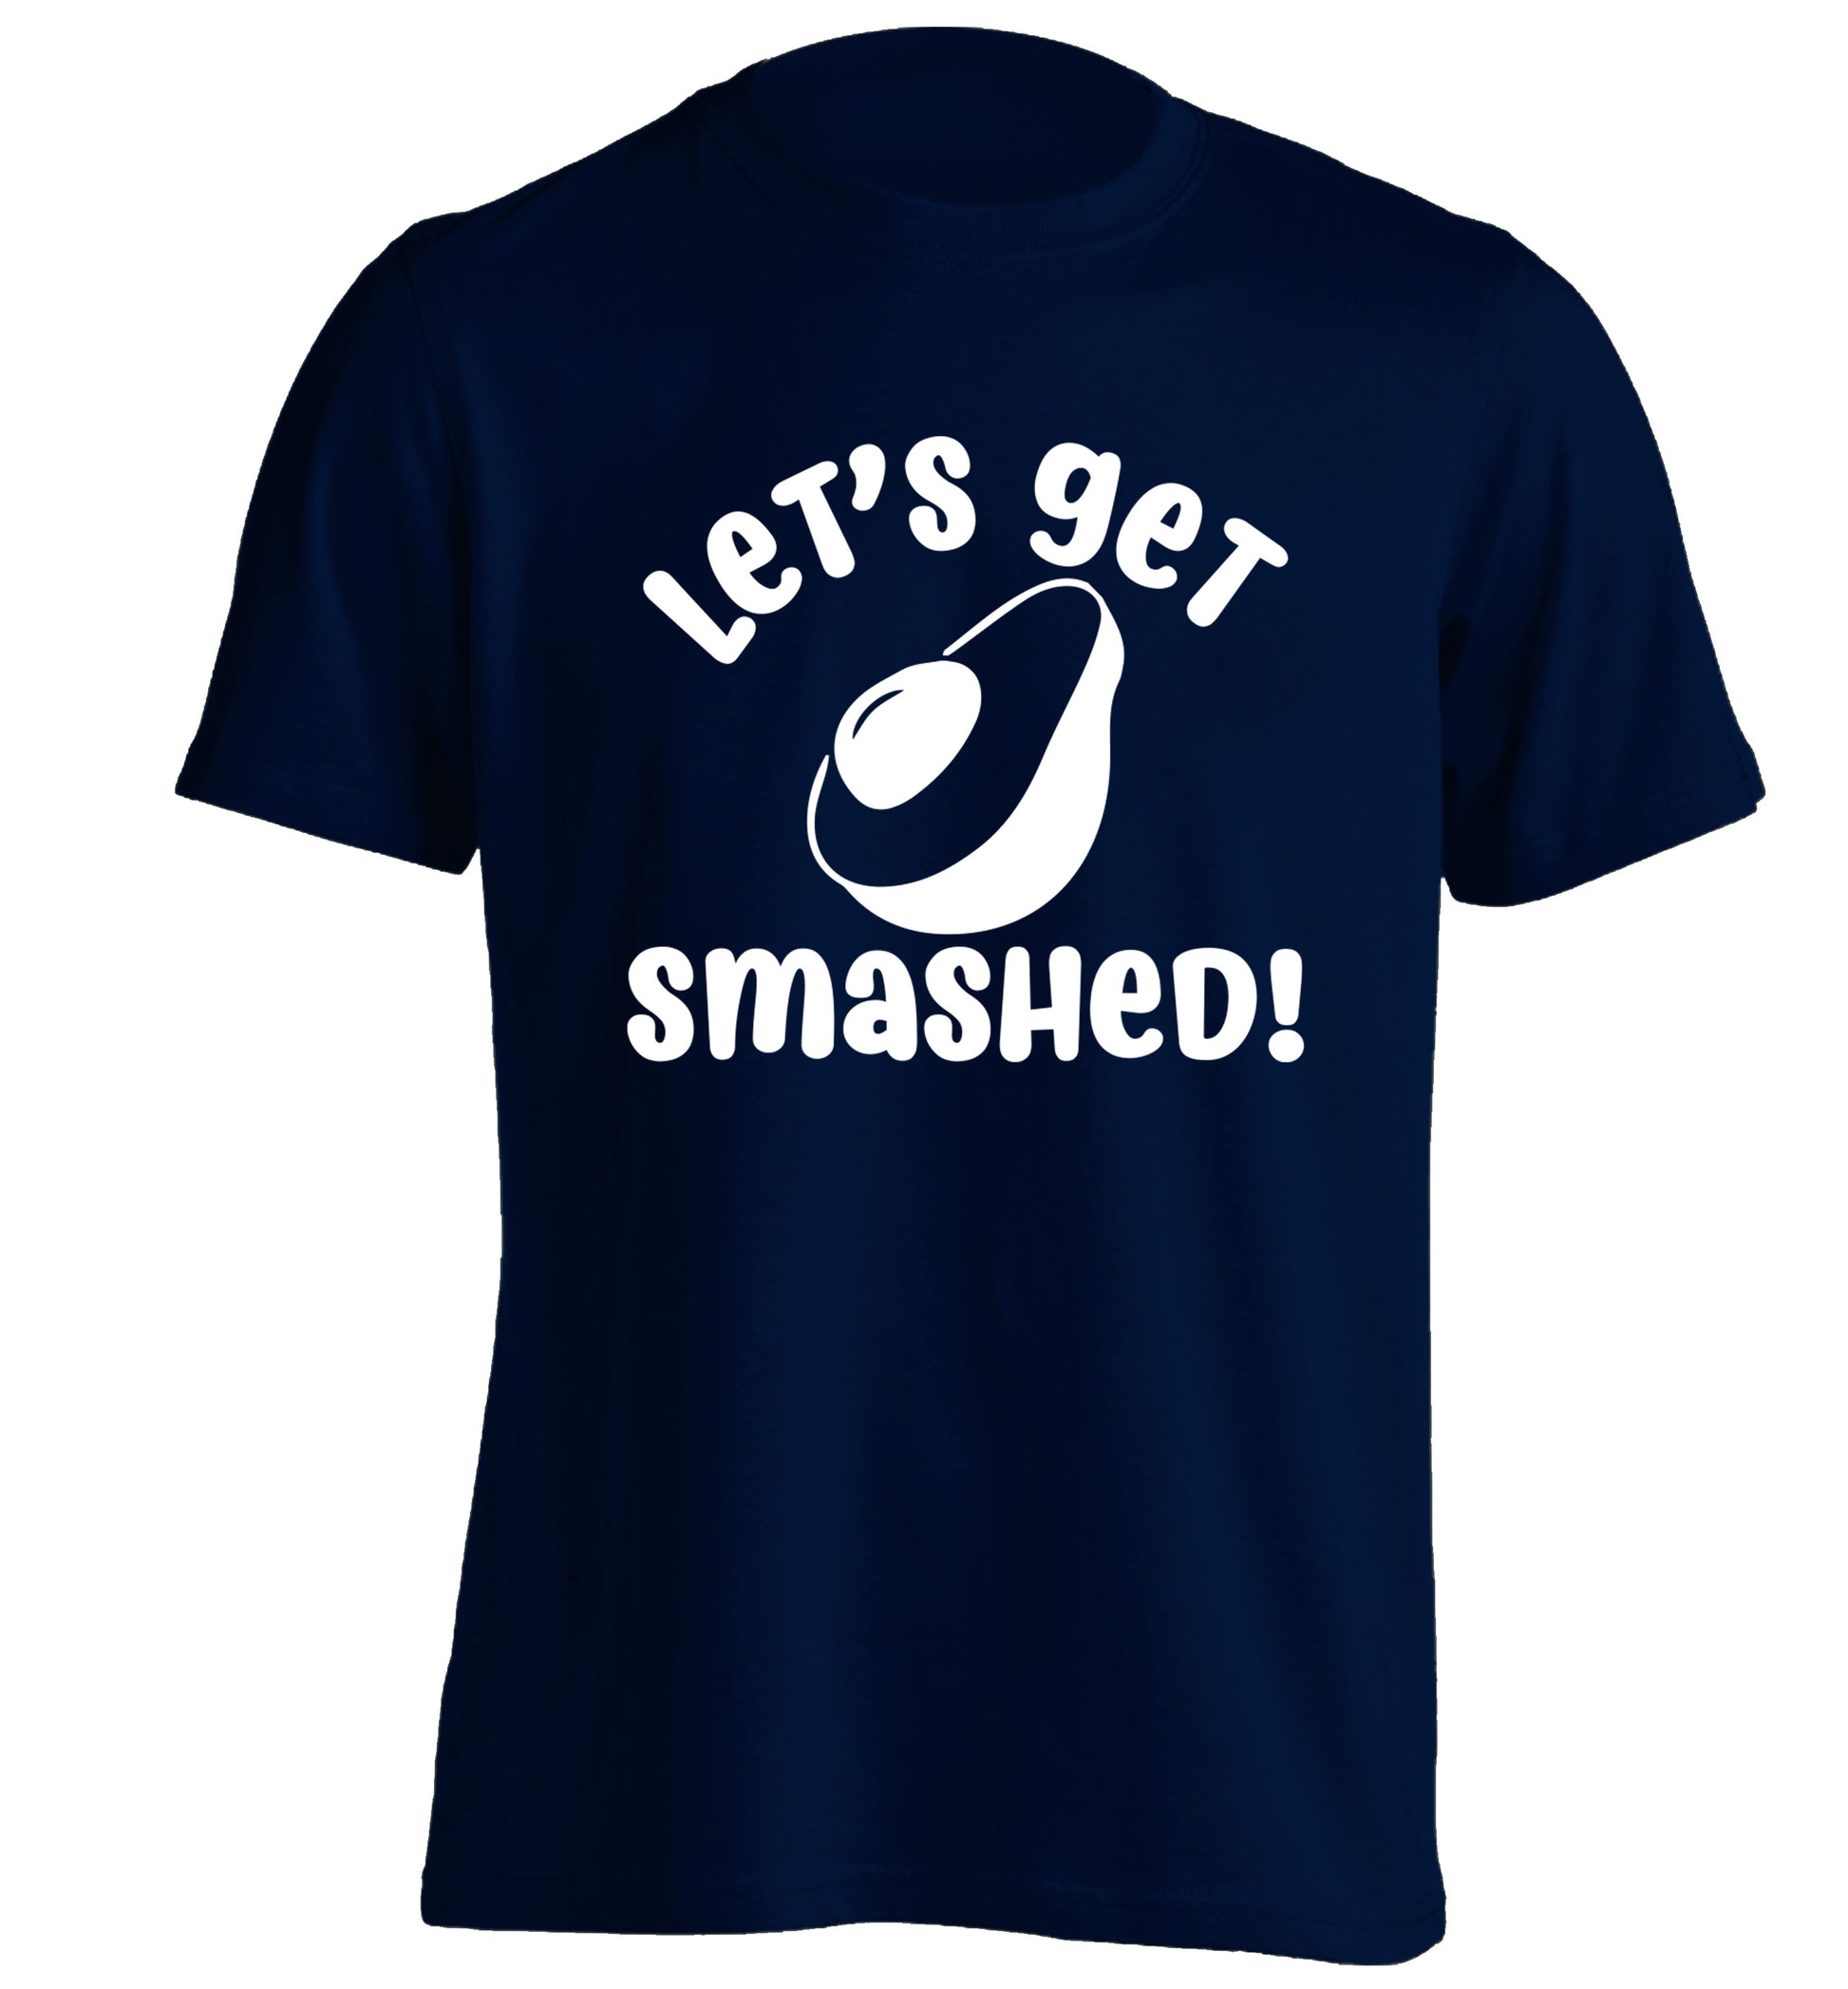 Let's get smashed adults unisex navy Tshirt 2XL